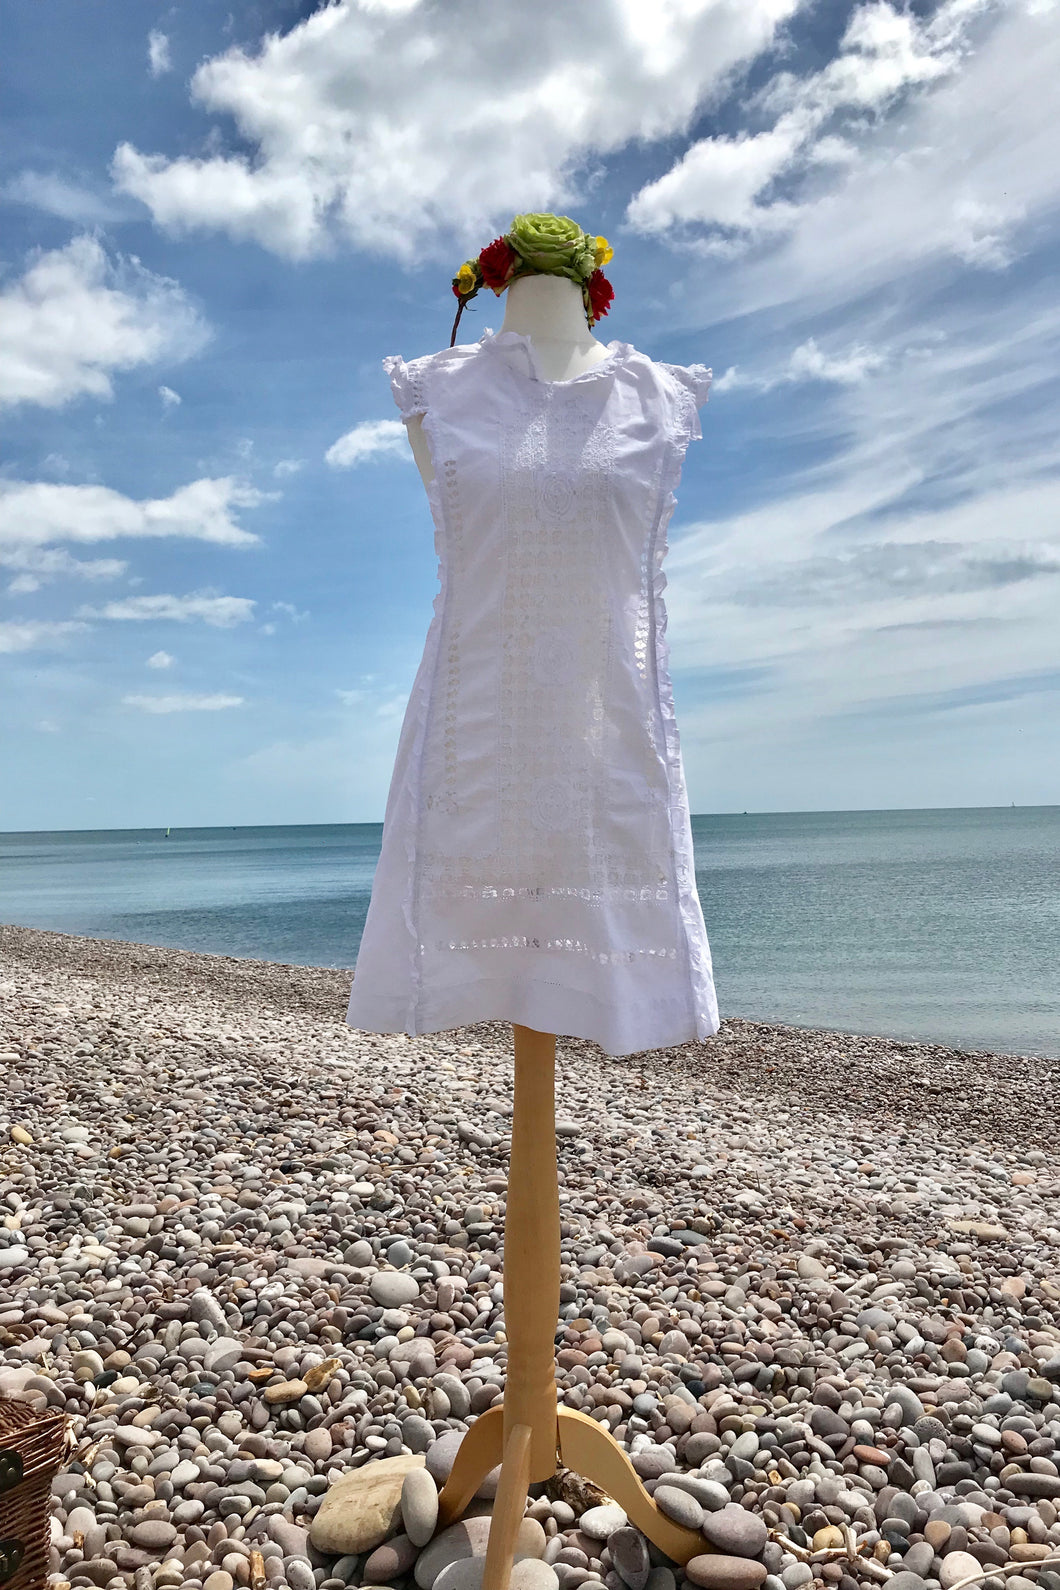 A crisp white linen mini dress and colourful flower crown are shown on a shop dummy with a pebble beach in the background.